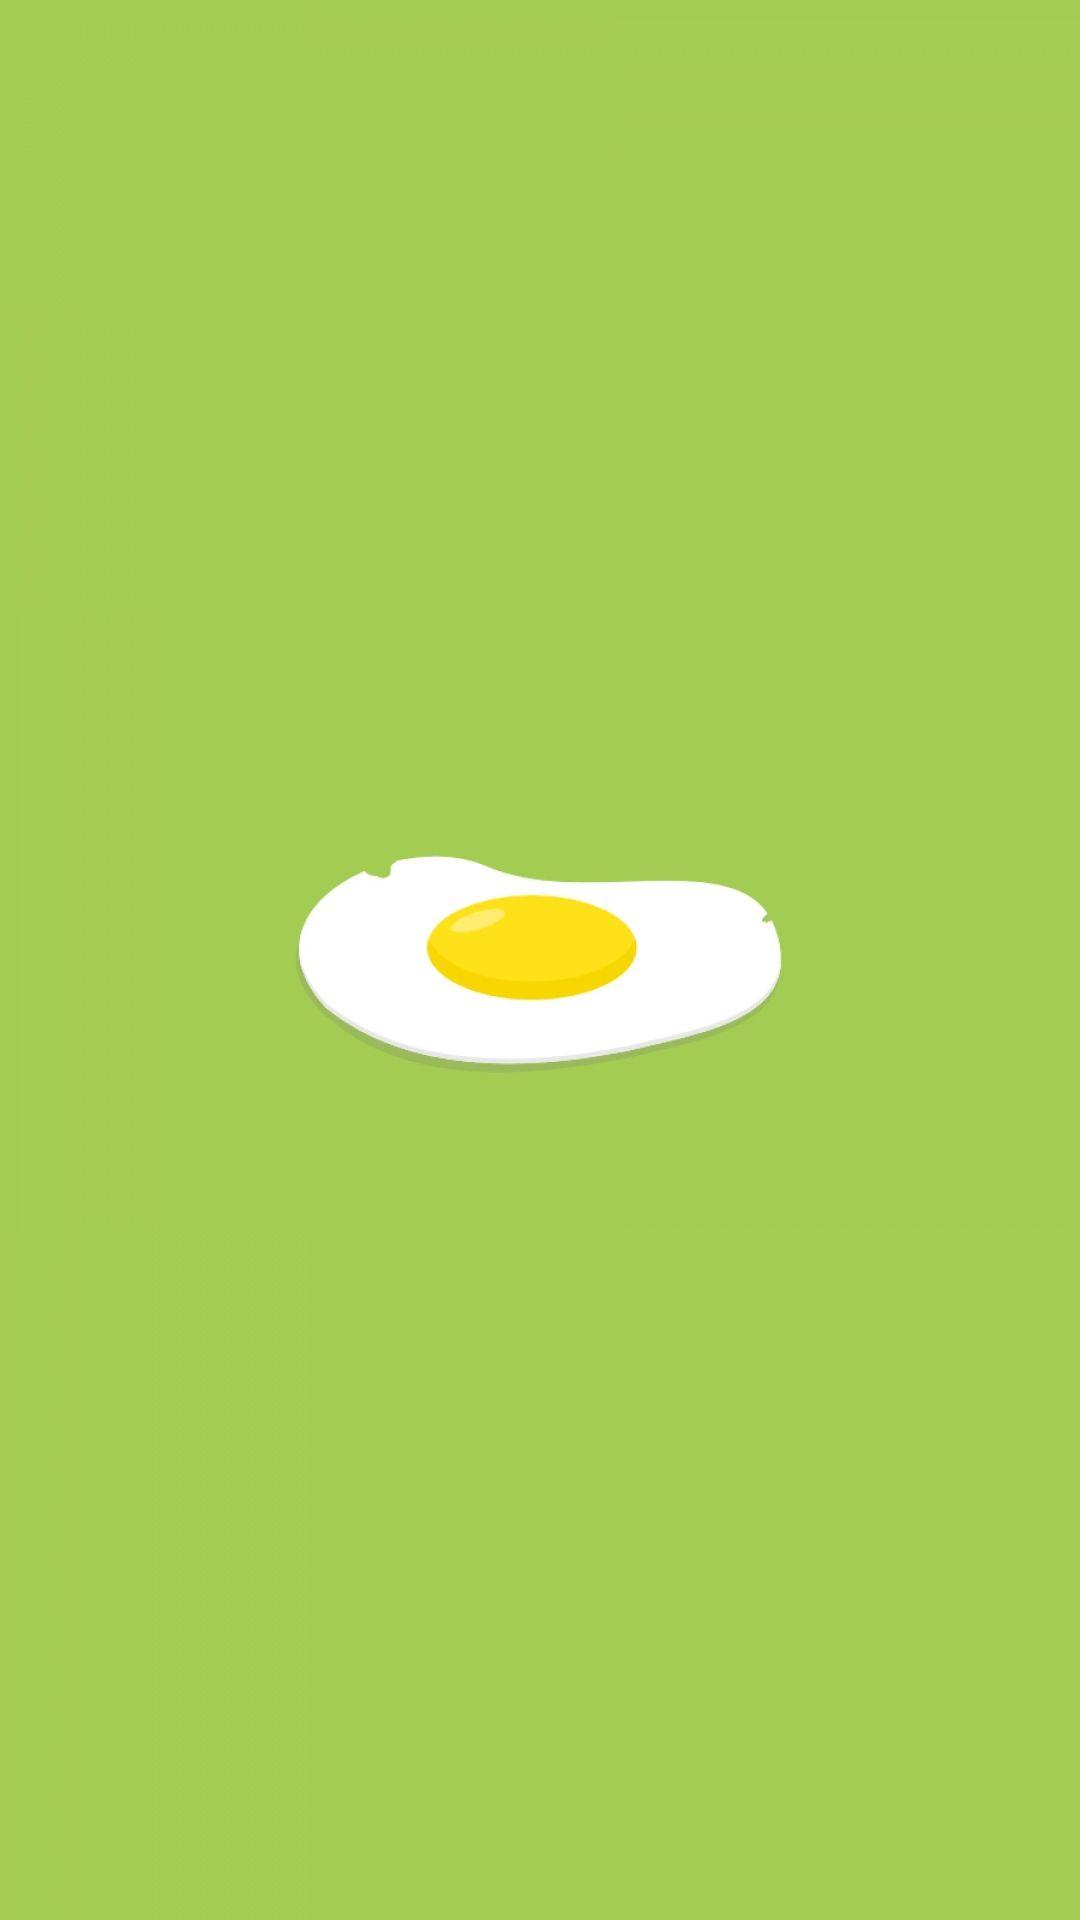 Egg / Find more #Minimalistic #iPhone + #Android #Wallpaper